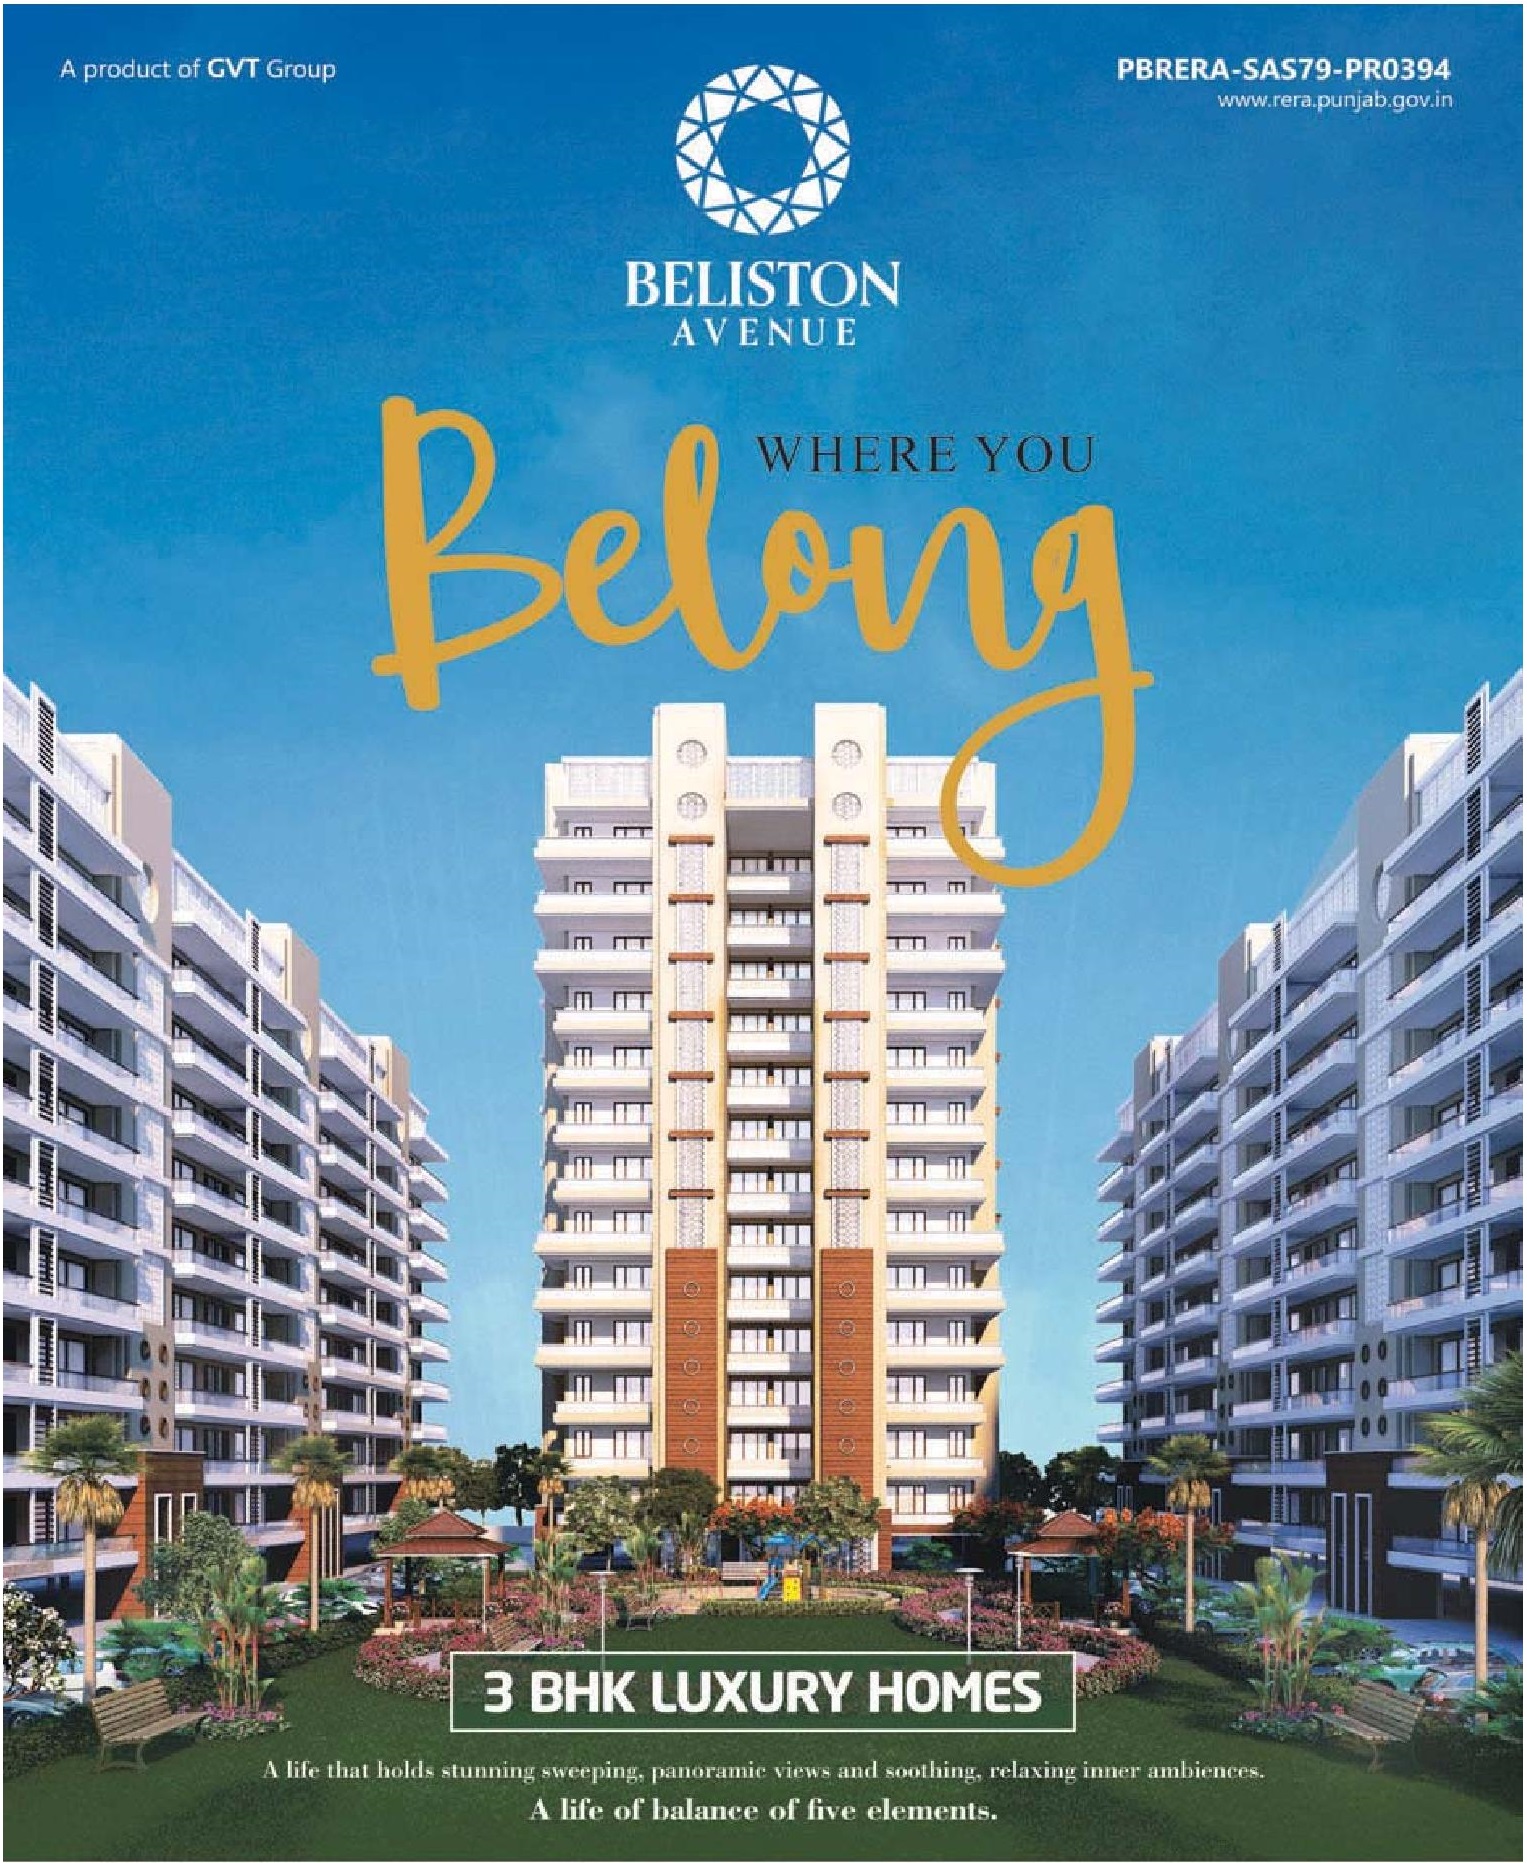 Book 3 bhk luxury homes at GVT Beliston Avenues in Gazipur, Mohali Update